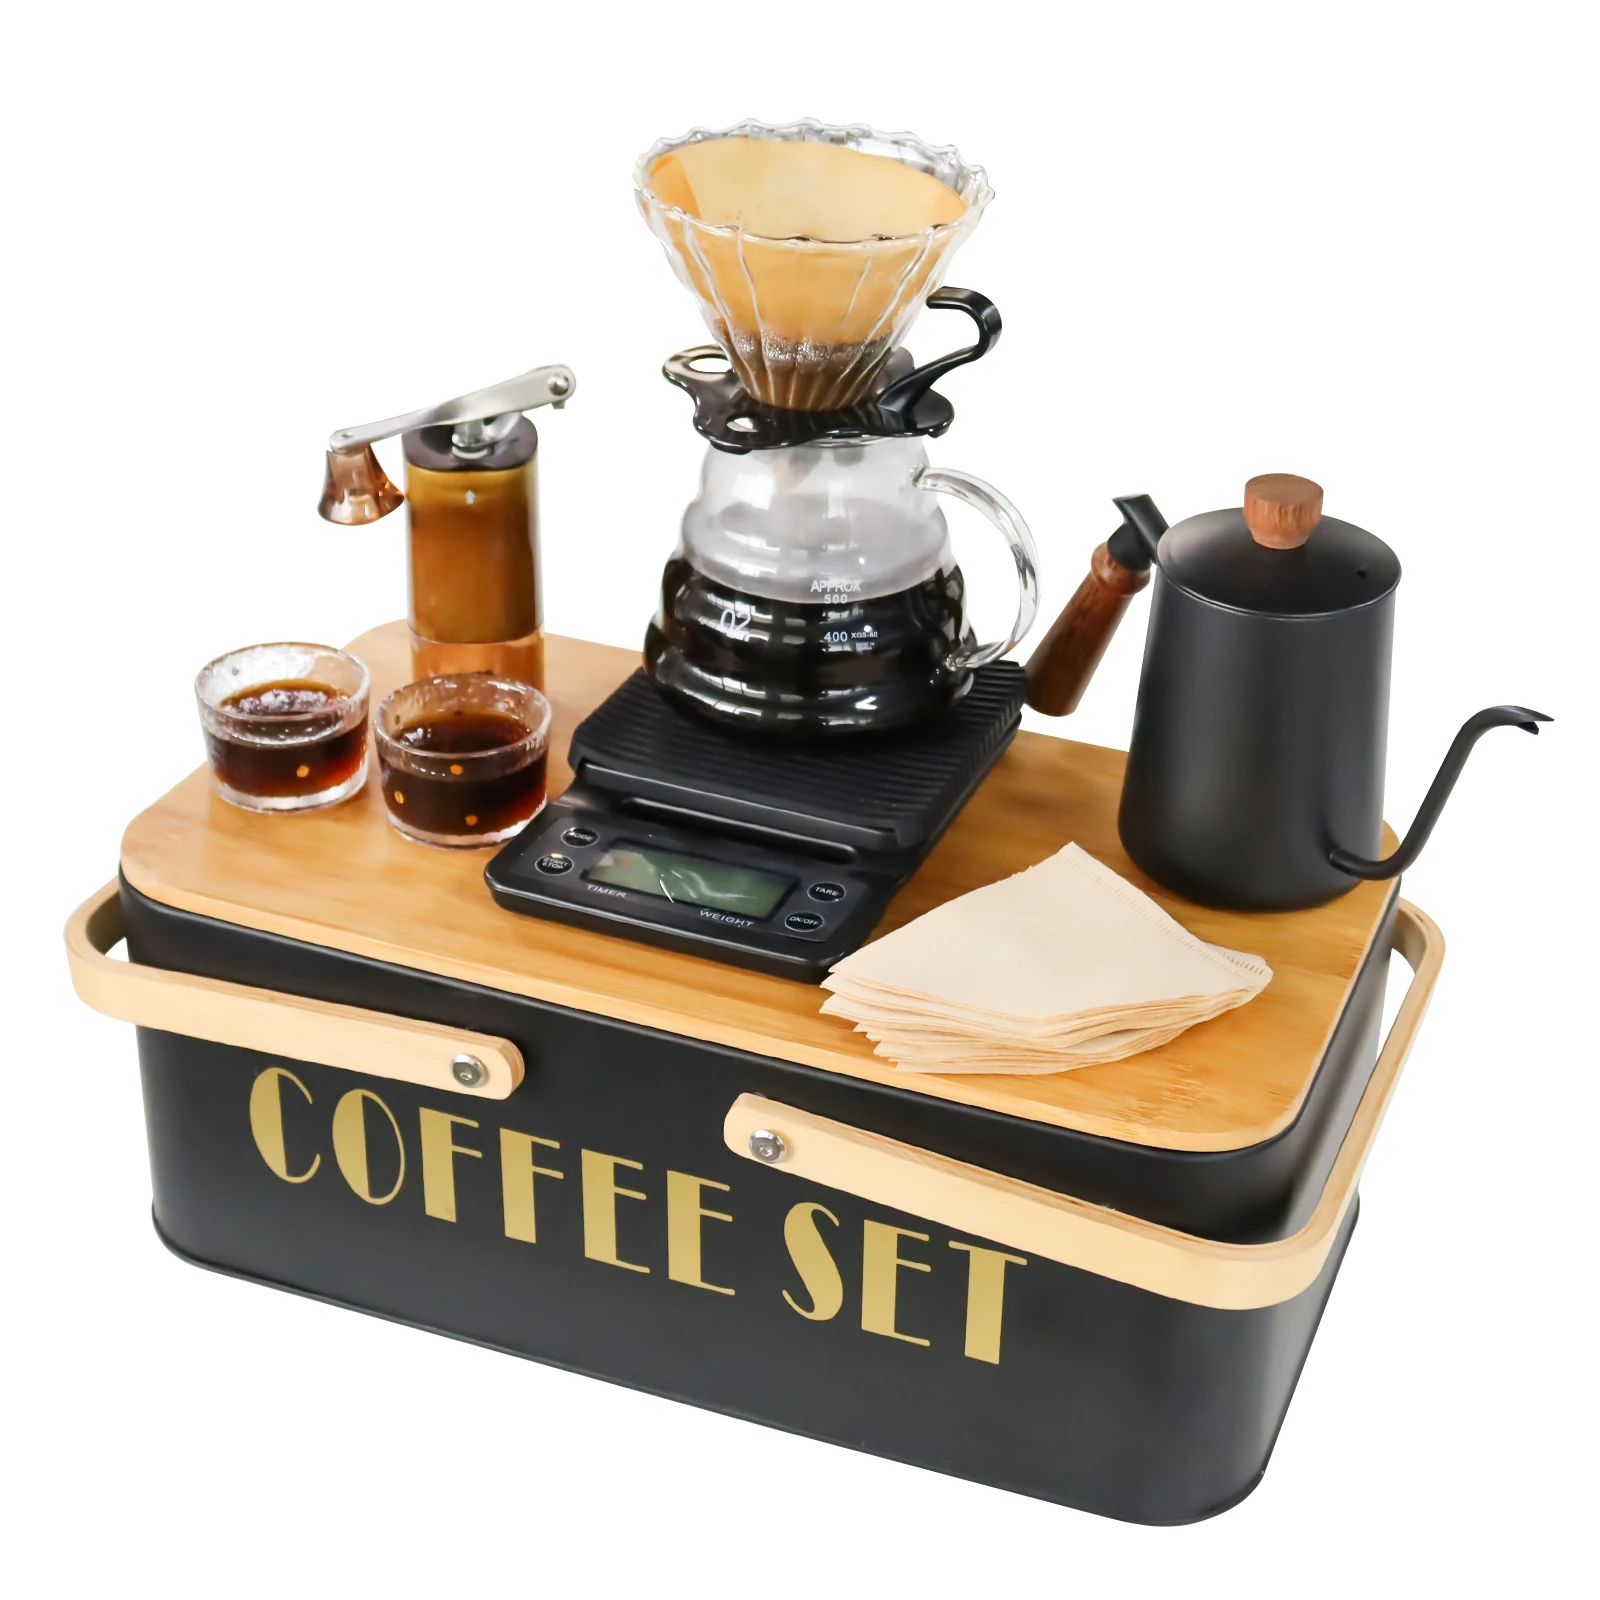 

Coffee Maker Kit With Pour Over Coffee Kettle Mug Manual Grinder Filters Scale Metal Box for Outdoor Traveling Festival Gift